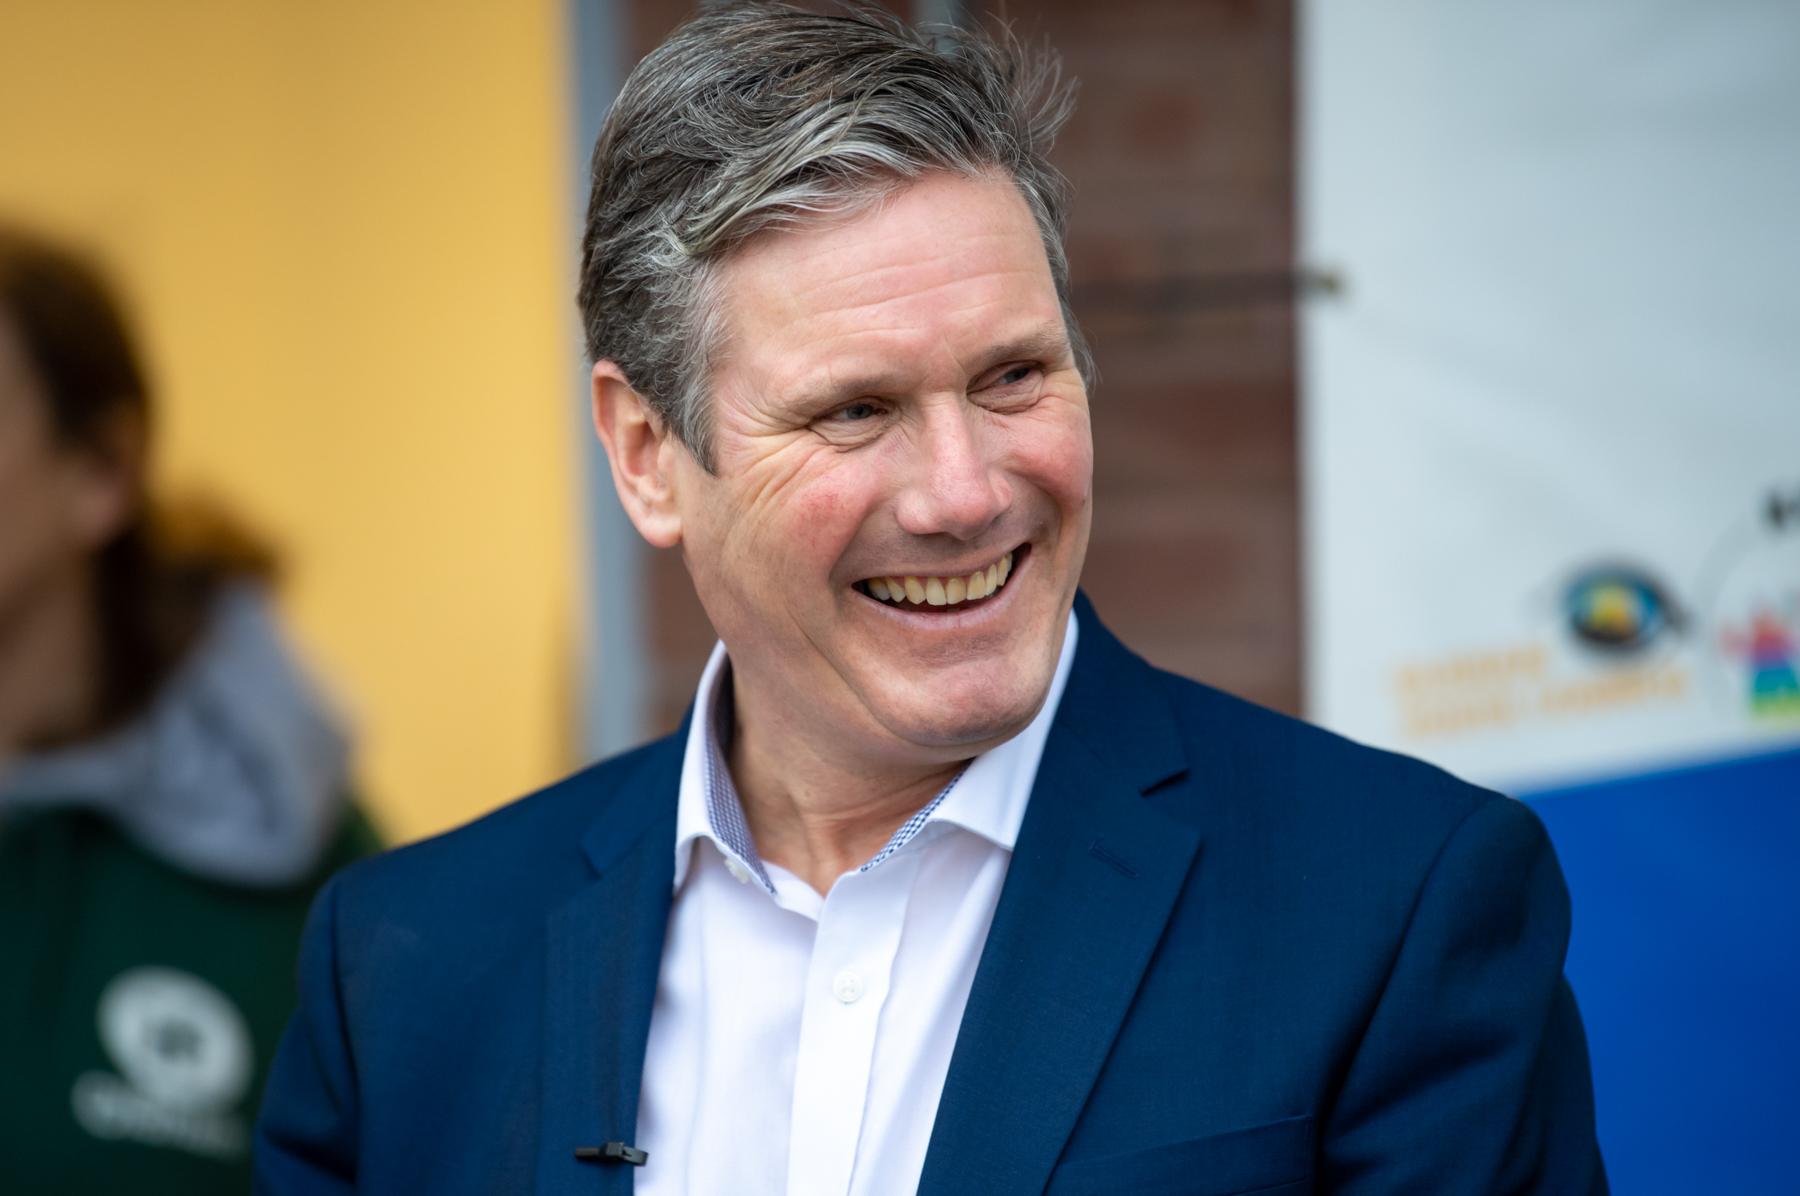 Keir Starmer - The Labour Party